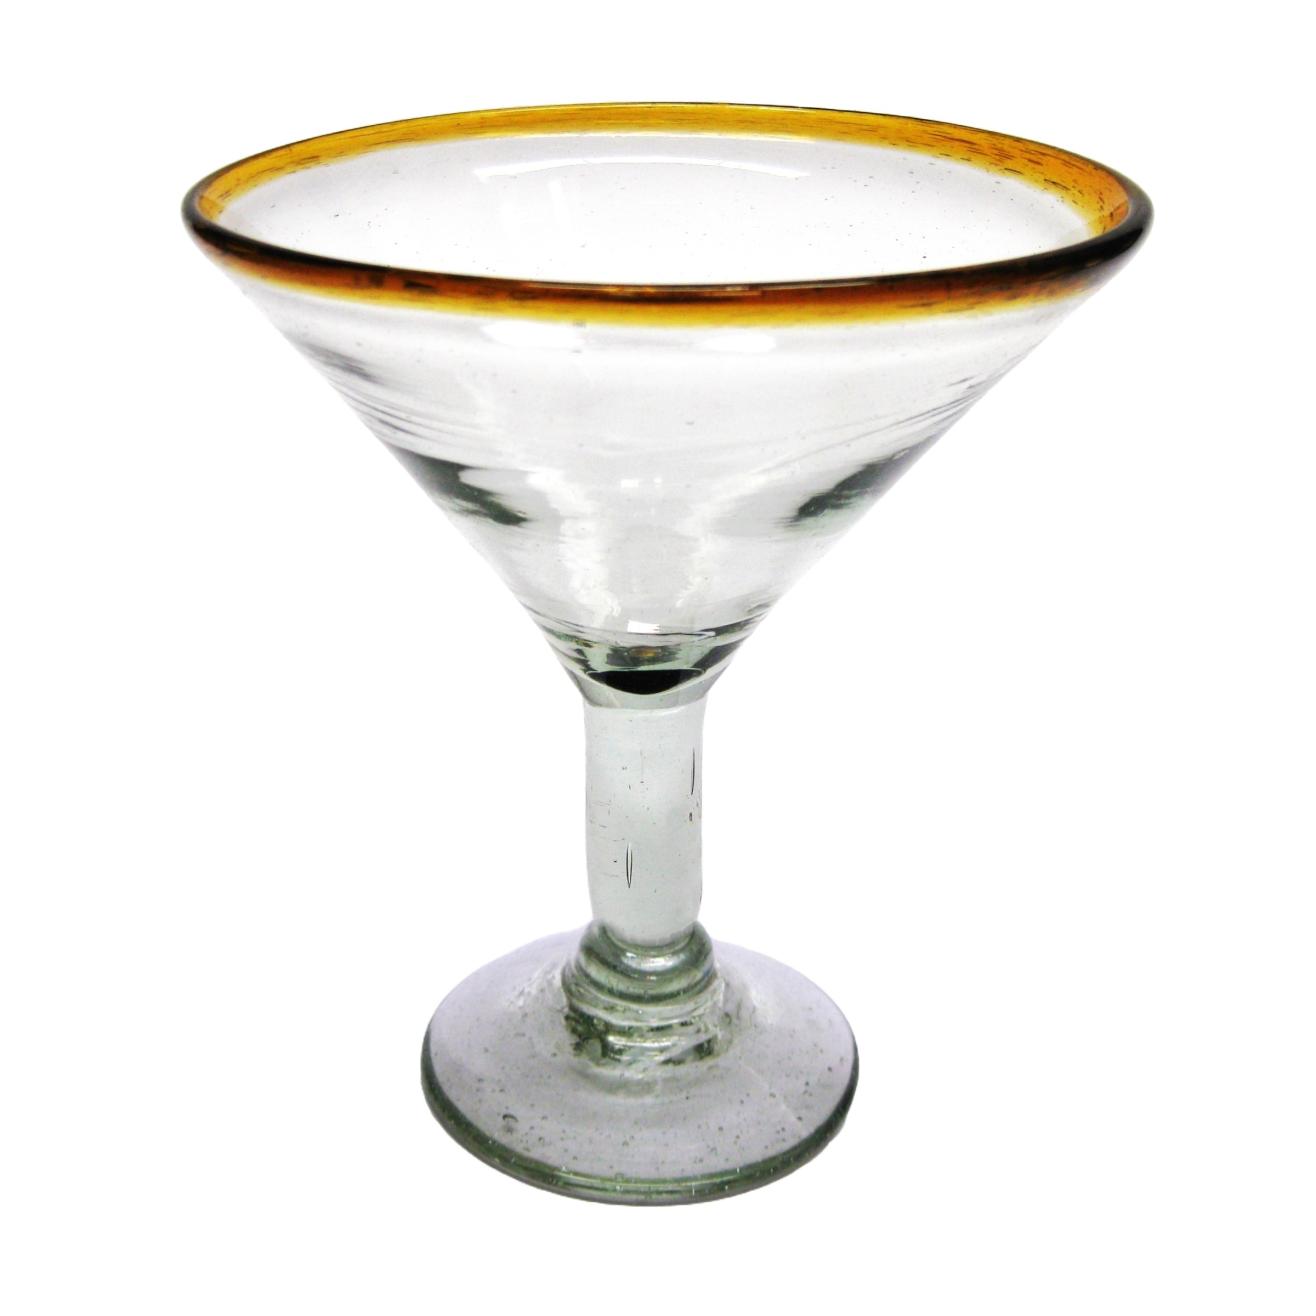 Wholesale Mexican Margarita Glasses / Amber Rim 10 oz Martini Glasses  / This wonderful set of martini glasses will bring a classic, mexican touch to your parties.